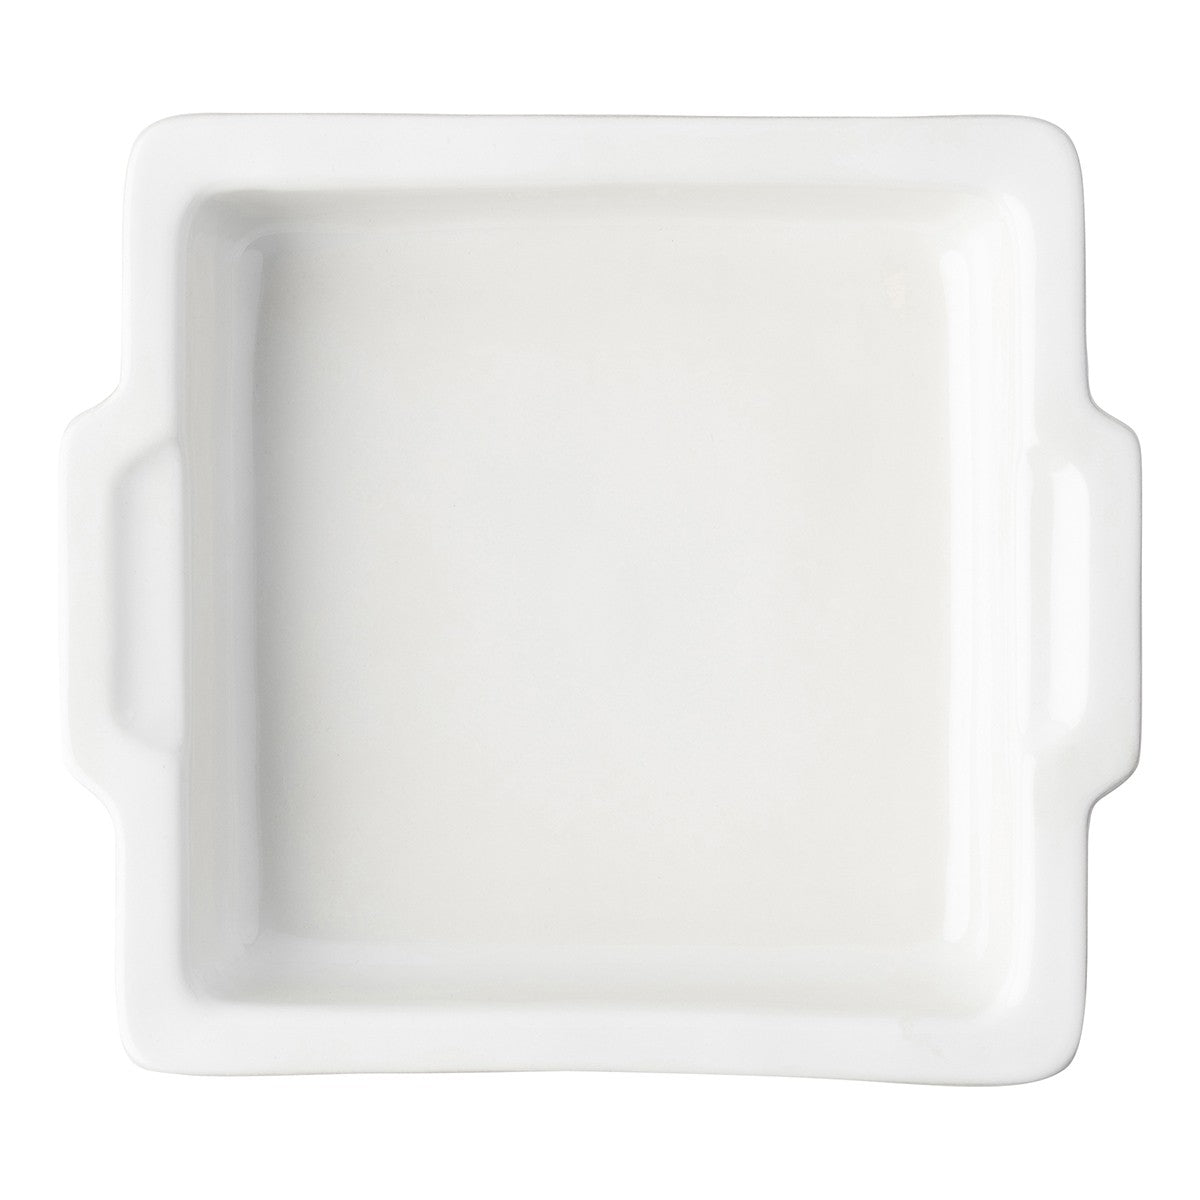 top view of puro square baking dish on a white background